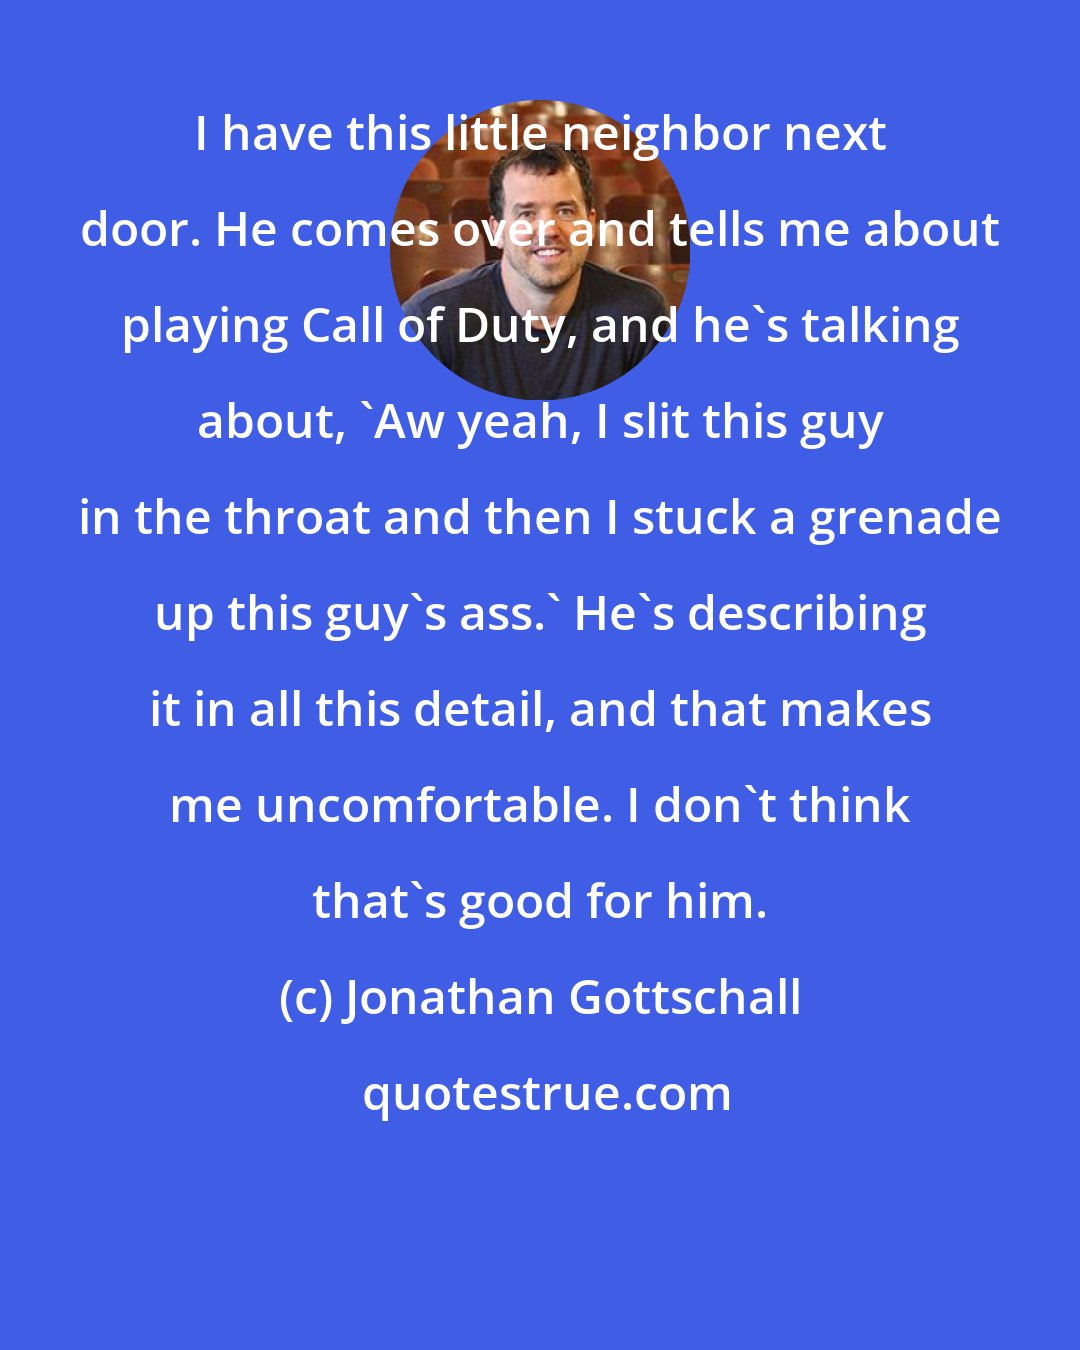 Jonathan Gottschall: I have this little neighbor next door. He comes over and tells me about playing Call of Duty, and he's talking about, 'Aw yeah, I slit this guy in the throat and then I stuck a grenade up this guy's ass.' He's describing it in all this detail, and that makes me uncomfortable. I don't think that's good for him.